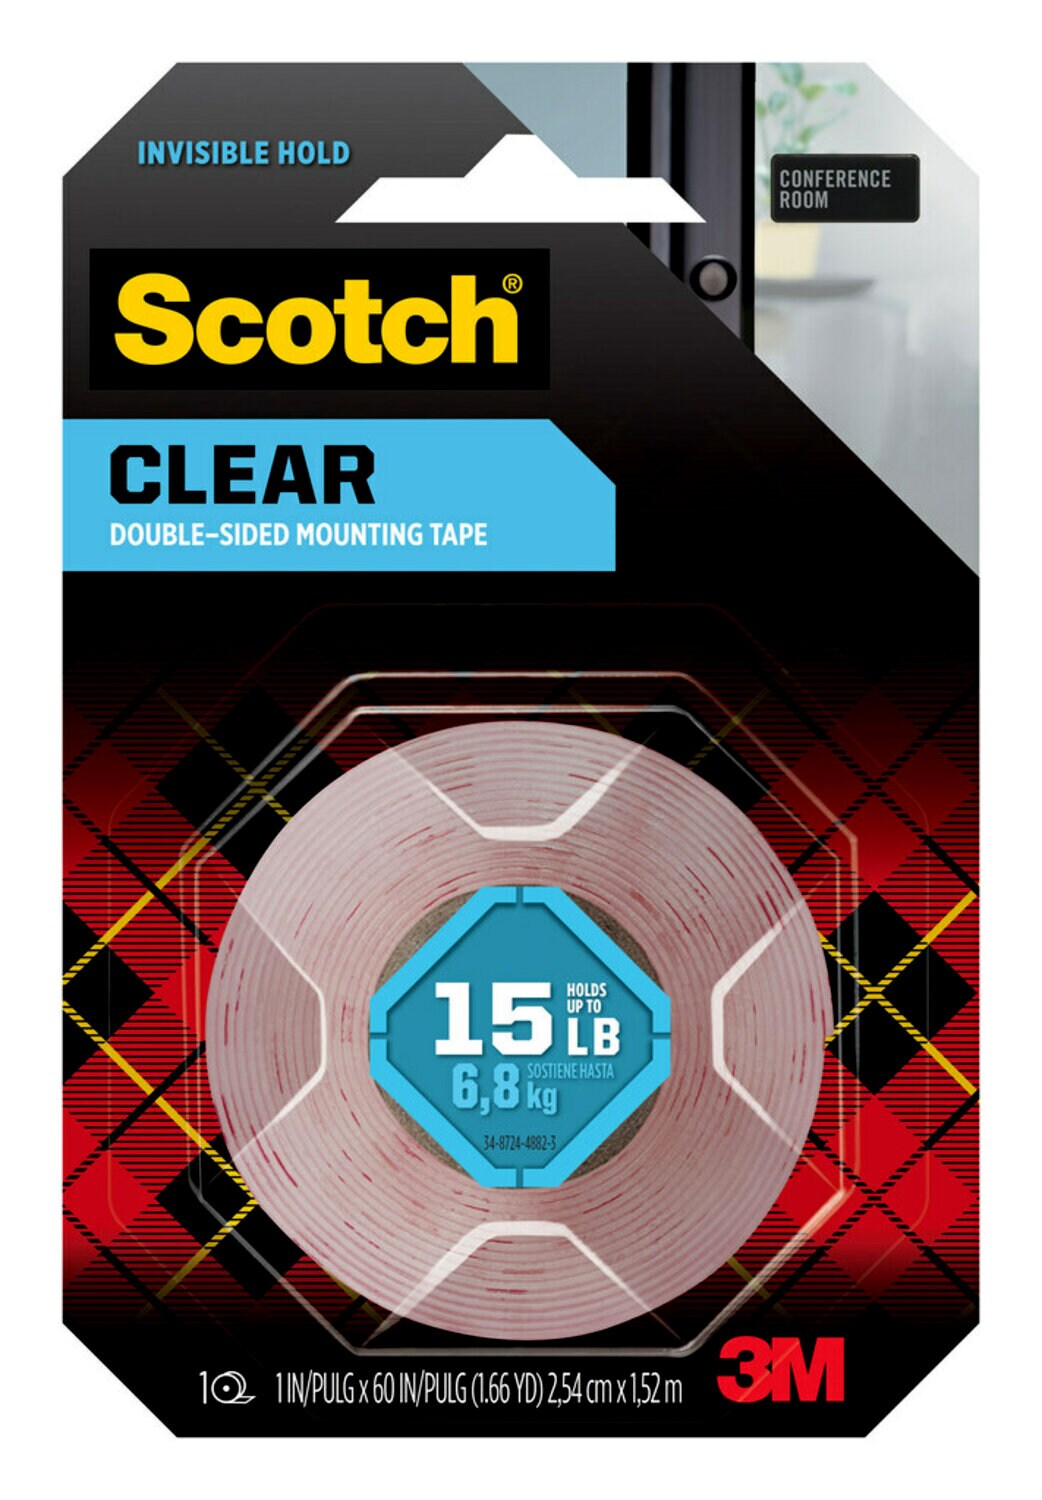 7100240563 - Scotch Clear Double-Sided Mounting Tape 410S-SR, 1 in x 60 in (2.54 cm x 1.52 m)